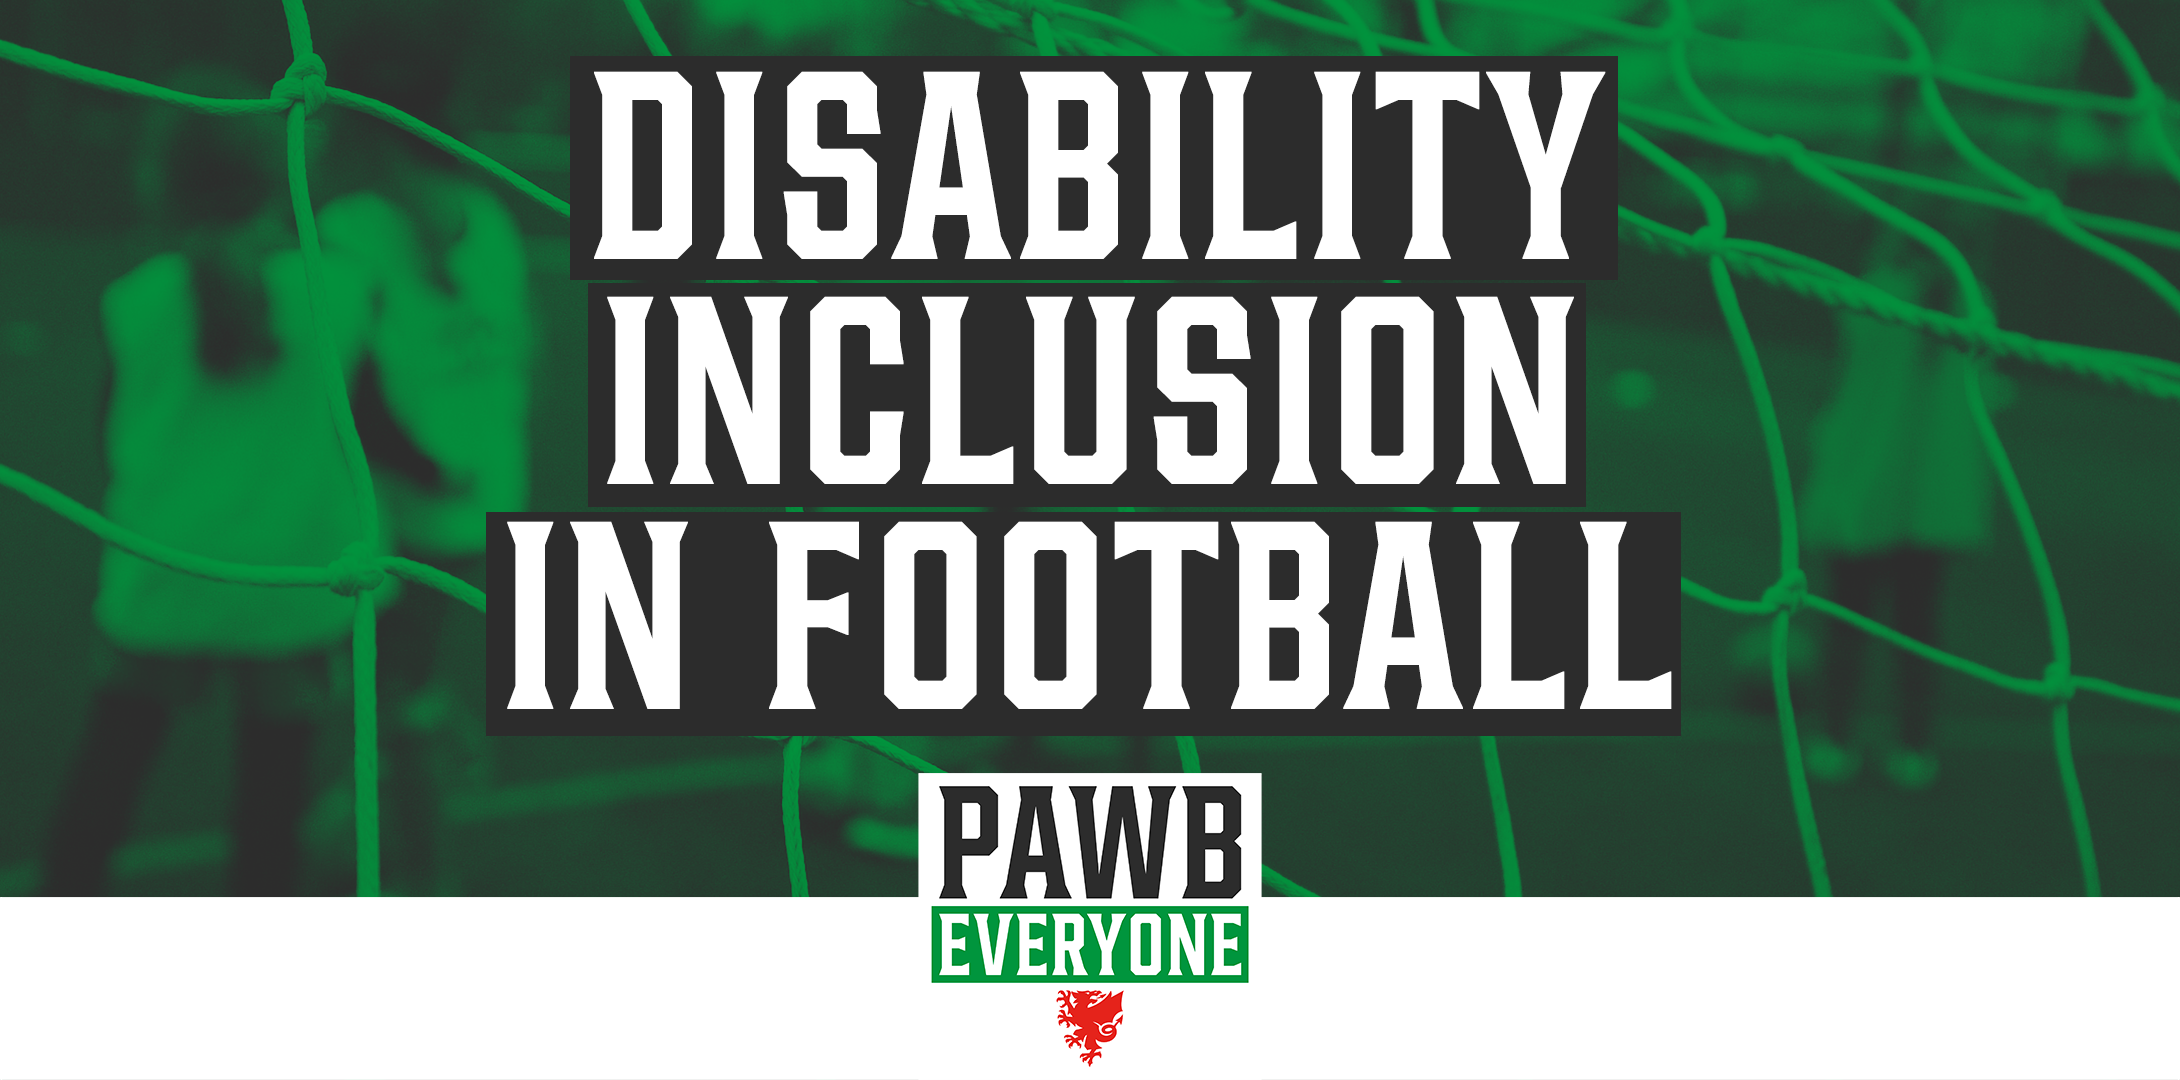 Disibility Inclusion in football - Clwb PAWB Summit EB.png